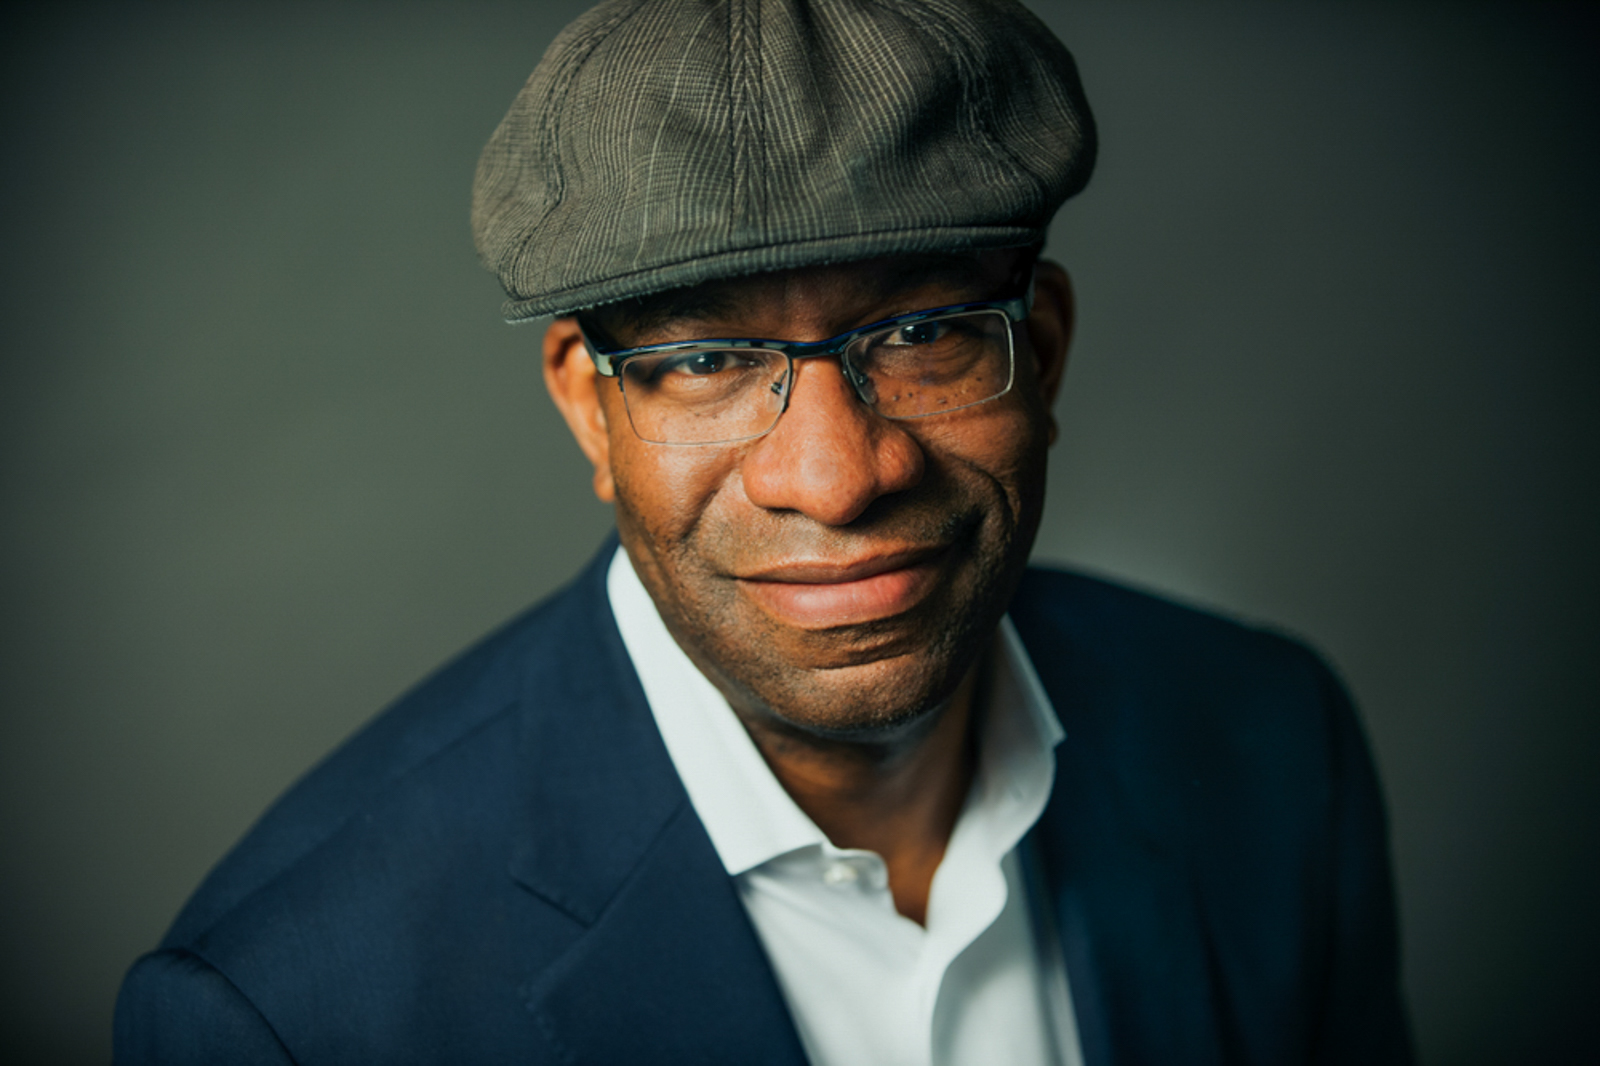 Portrait of a man wearing a hat and glasses with a soft smile